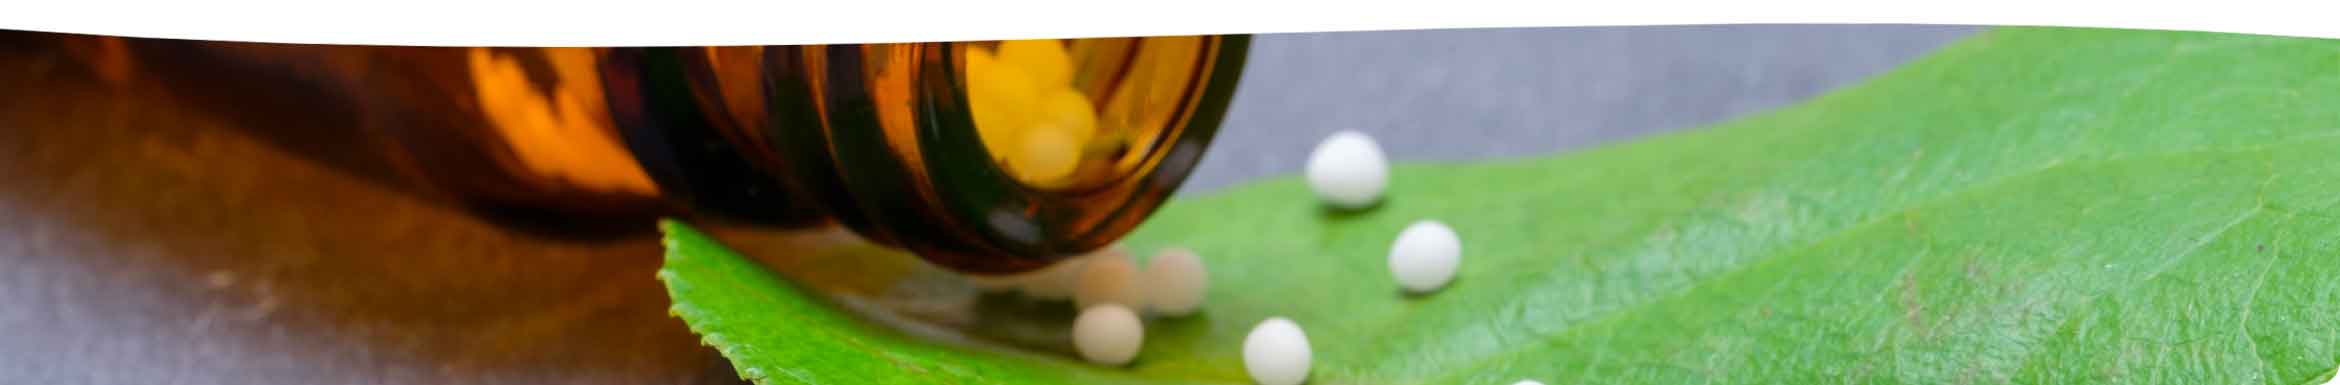 Homeopathy and Aromatherapy